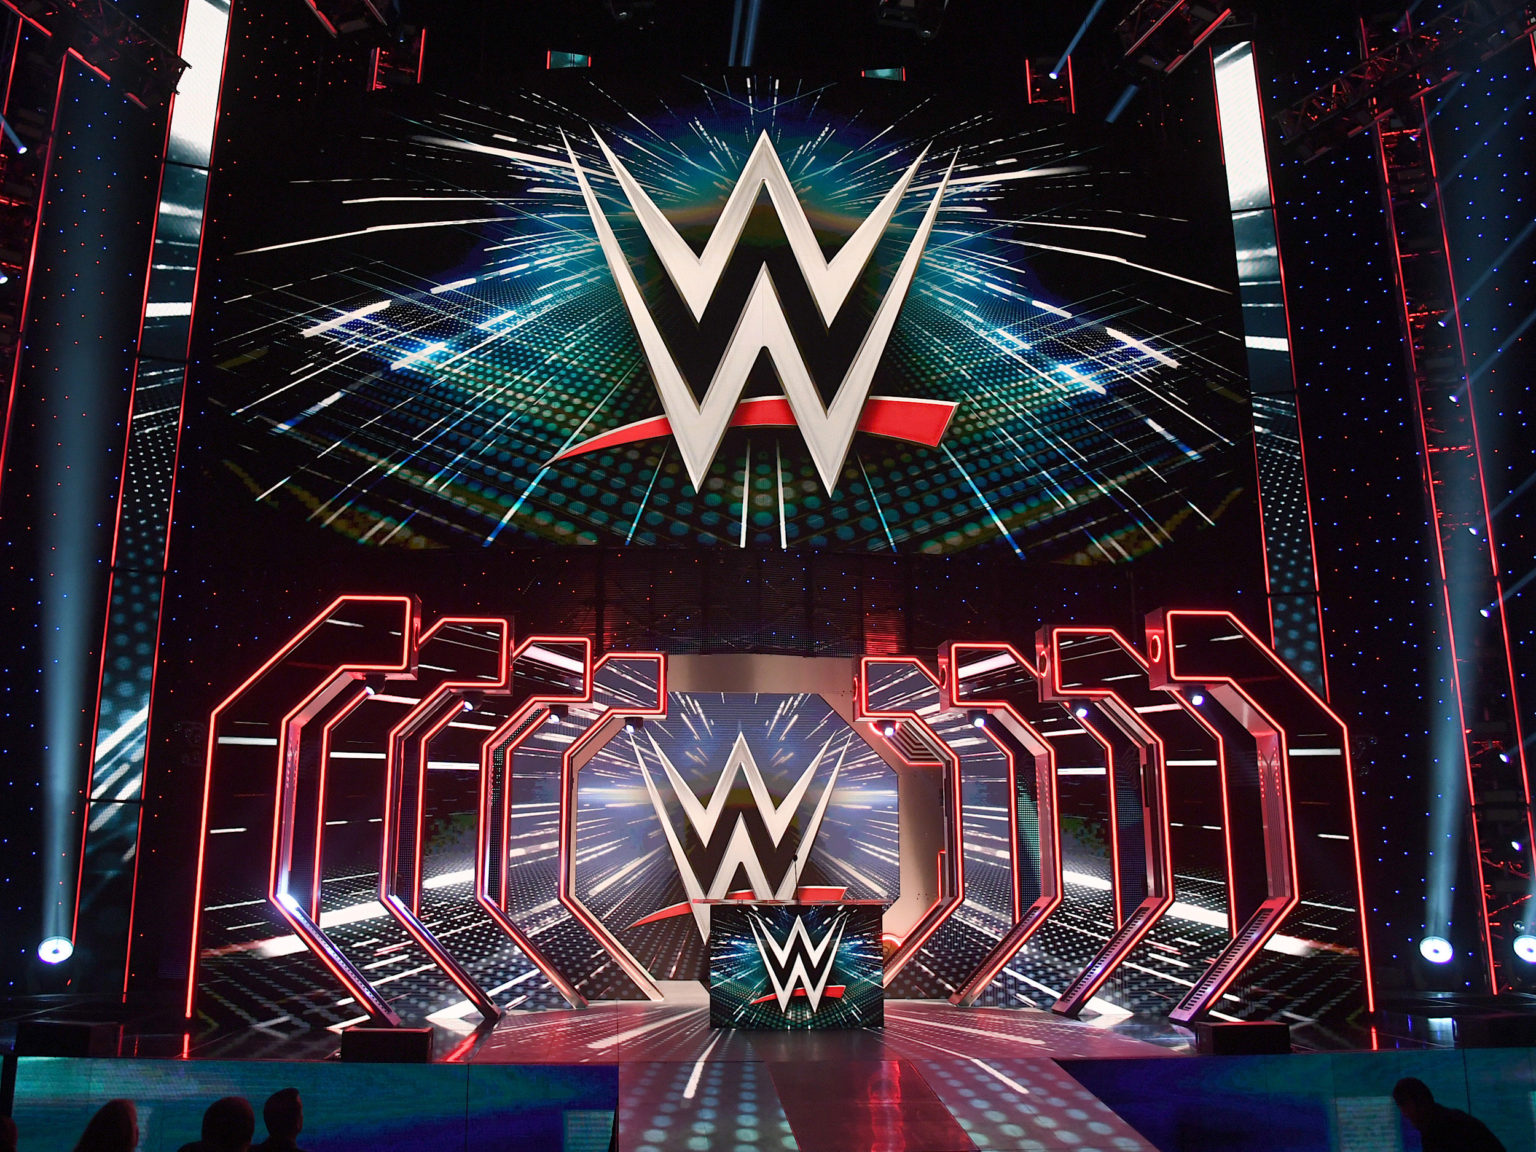 WWE logos are shown on screens before a WWE news conference at T-Mobile Arena on October 11, 2019 in Las Vegas, Nevada.